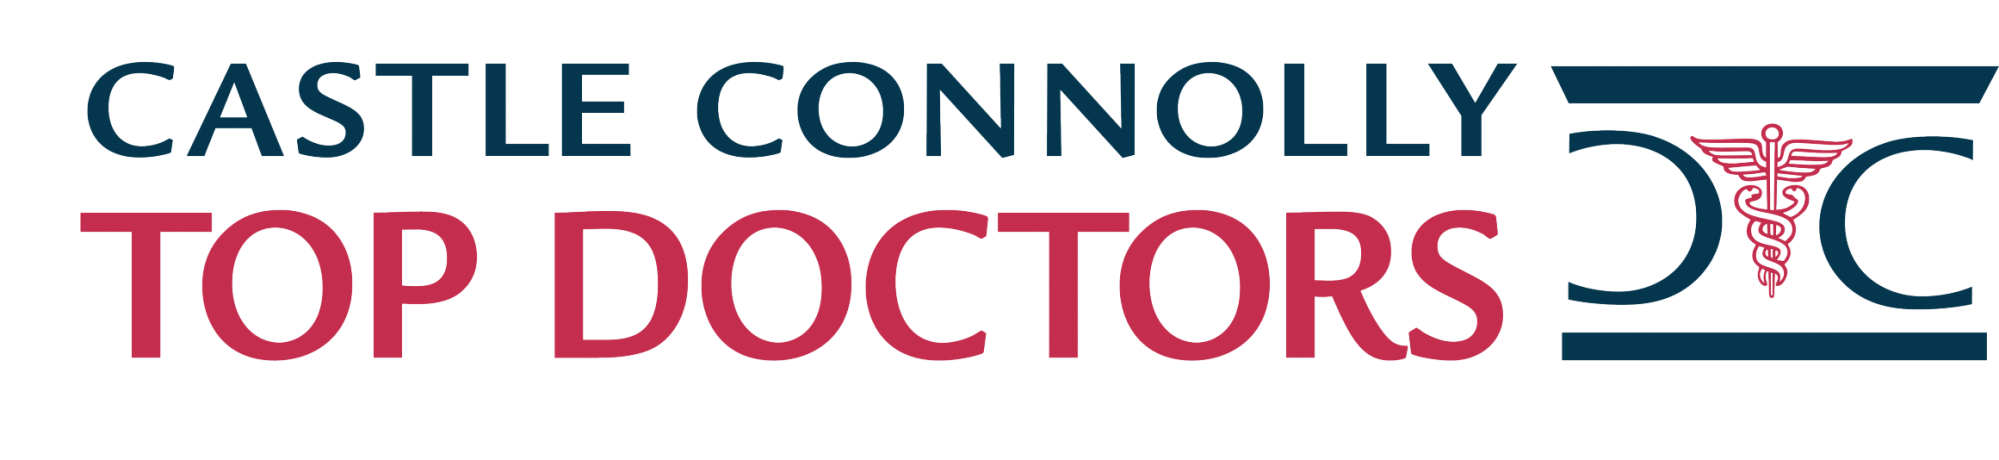 Access Sports Medicine Physicians Receive Castle Connolly Top Doctor Awards for 2017